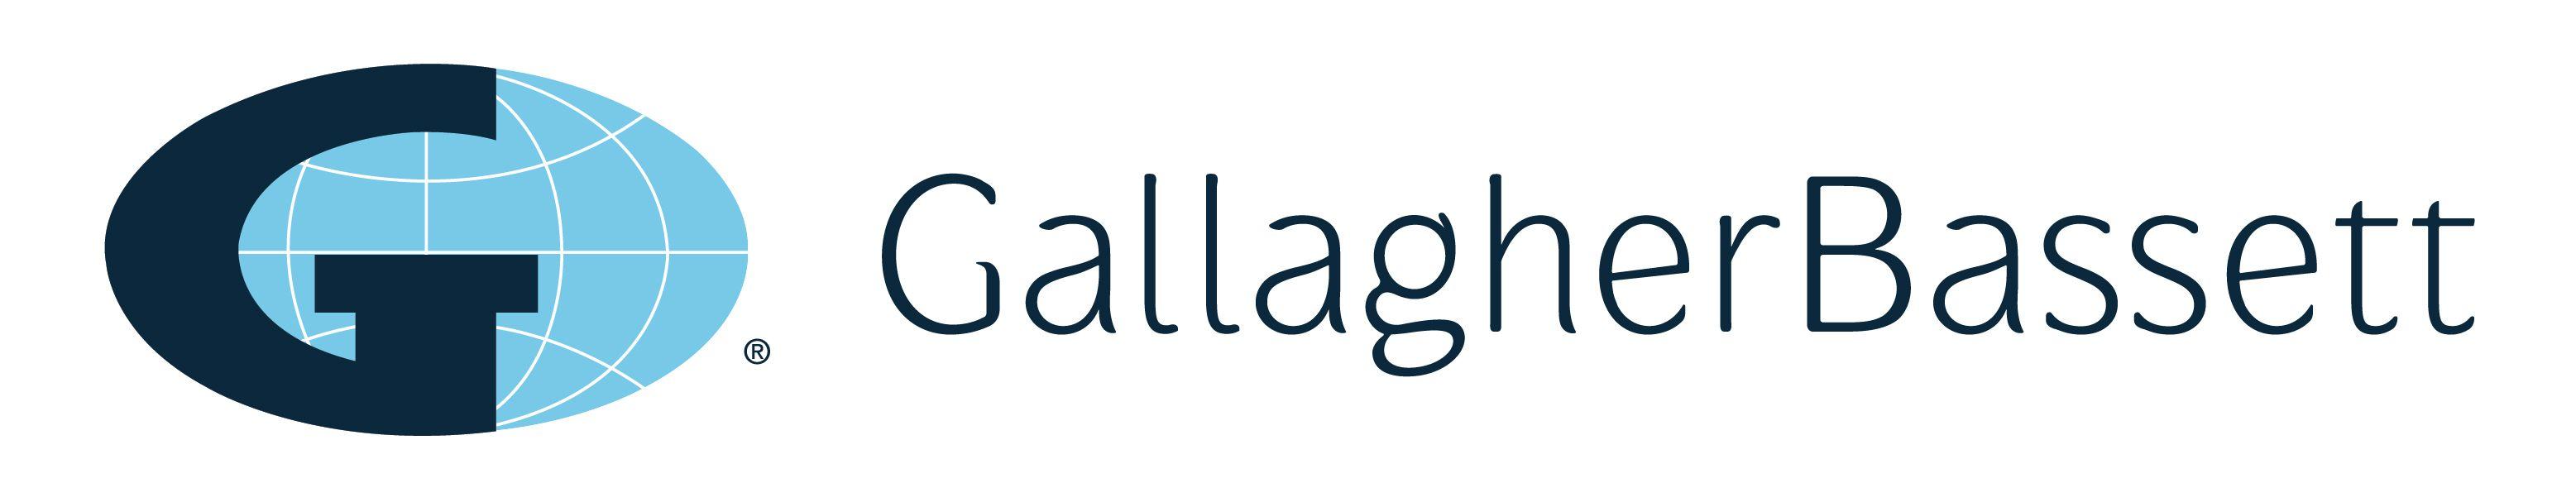 Gallagher Insurance Logo - Victorian Workers' Compensation